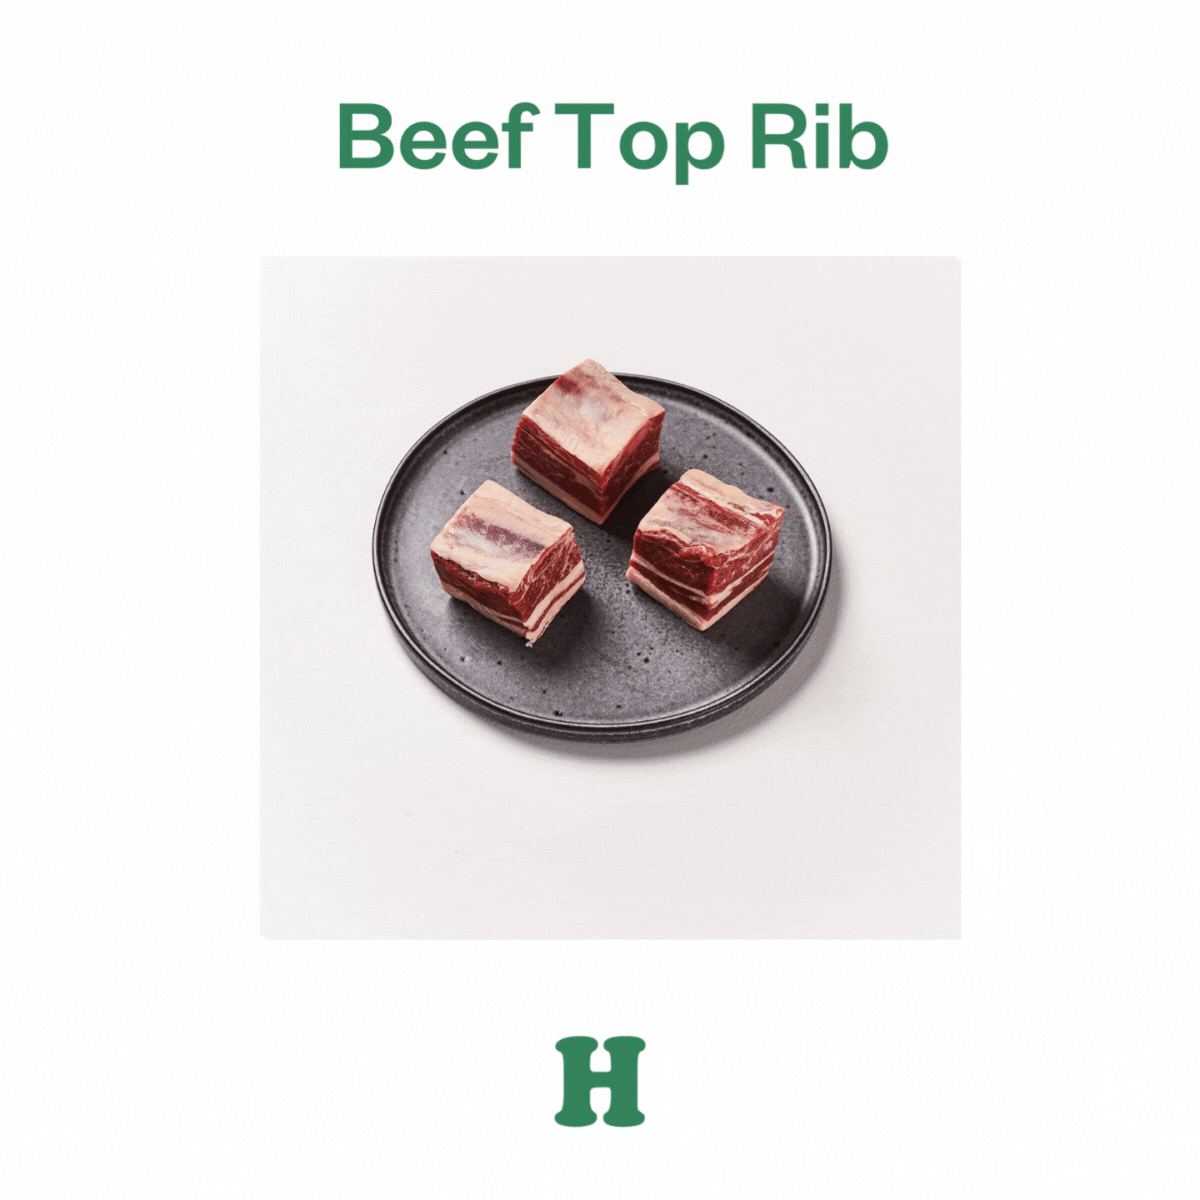 Free Beef Top Rib, with orders over $150